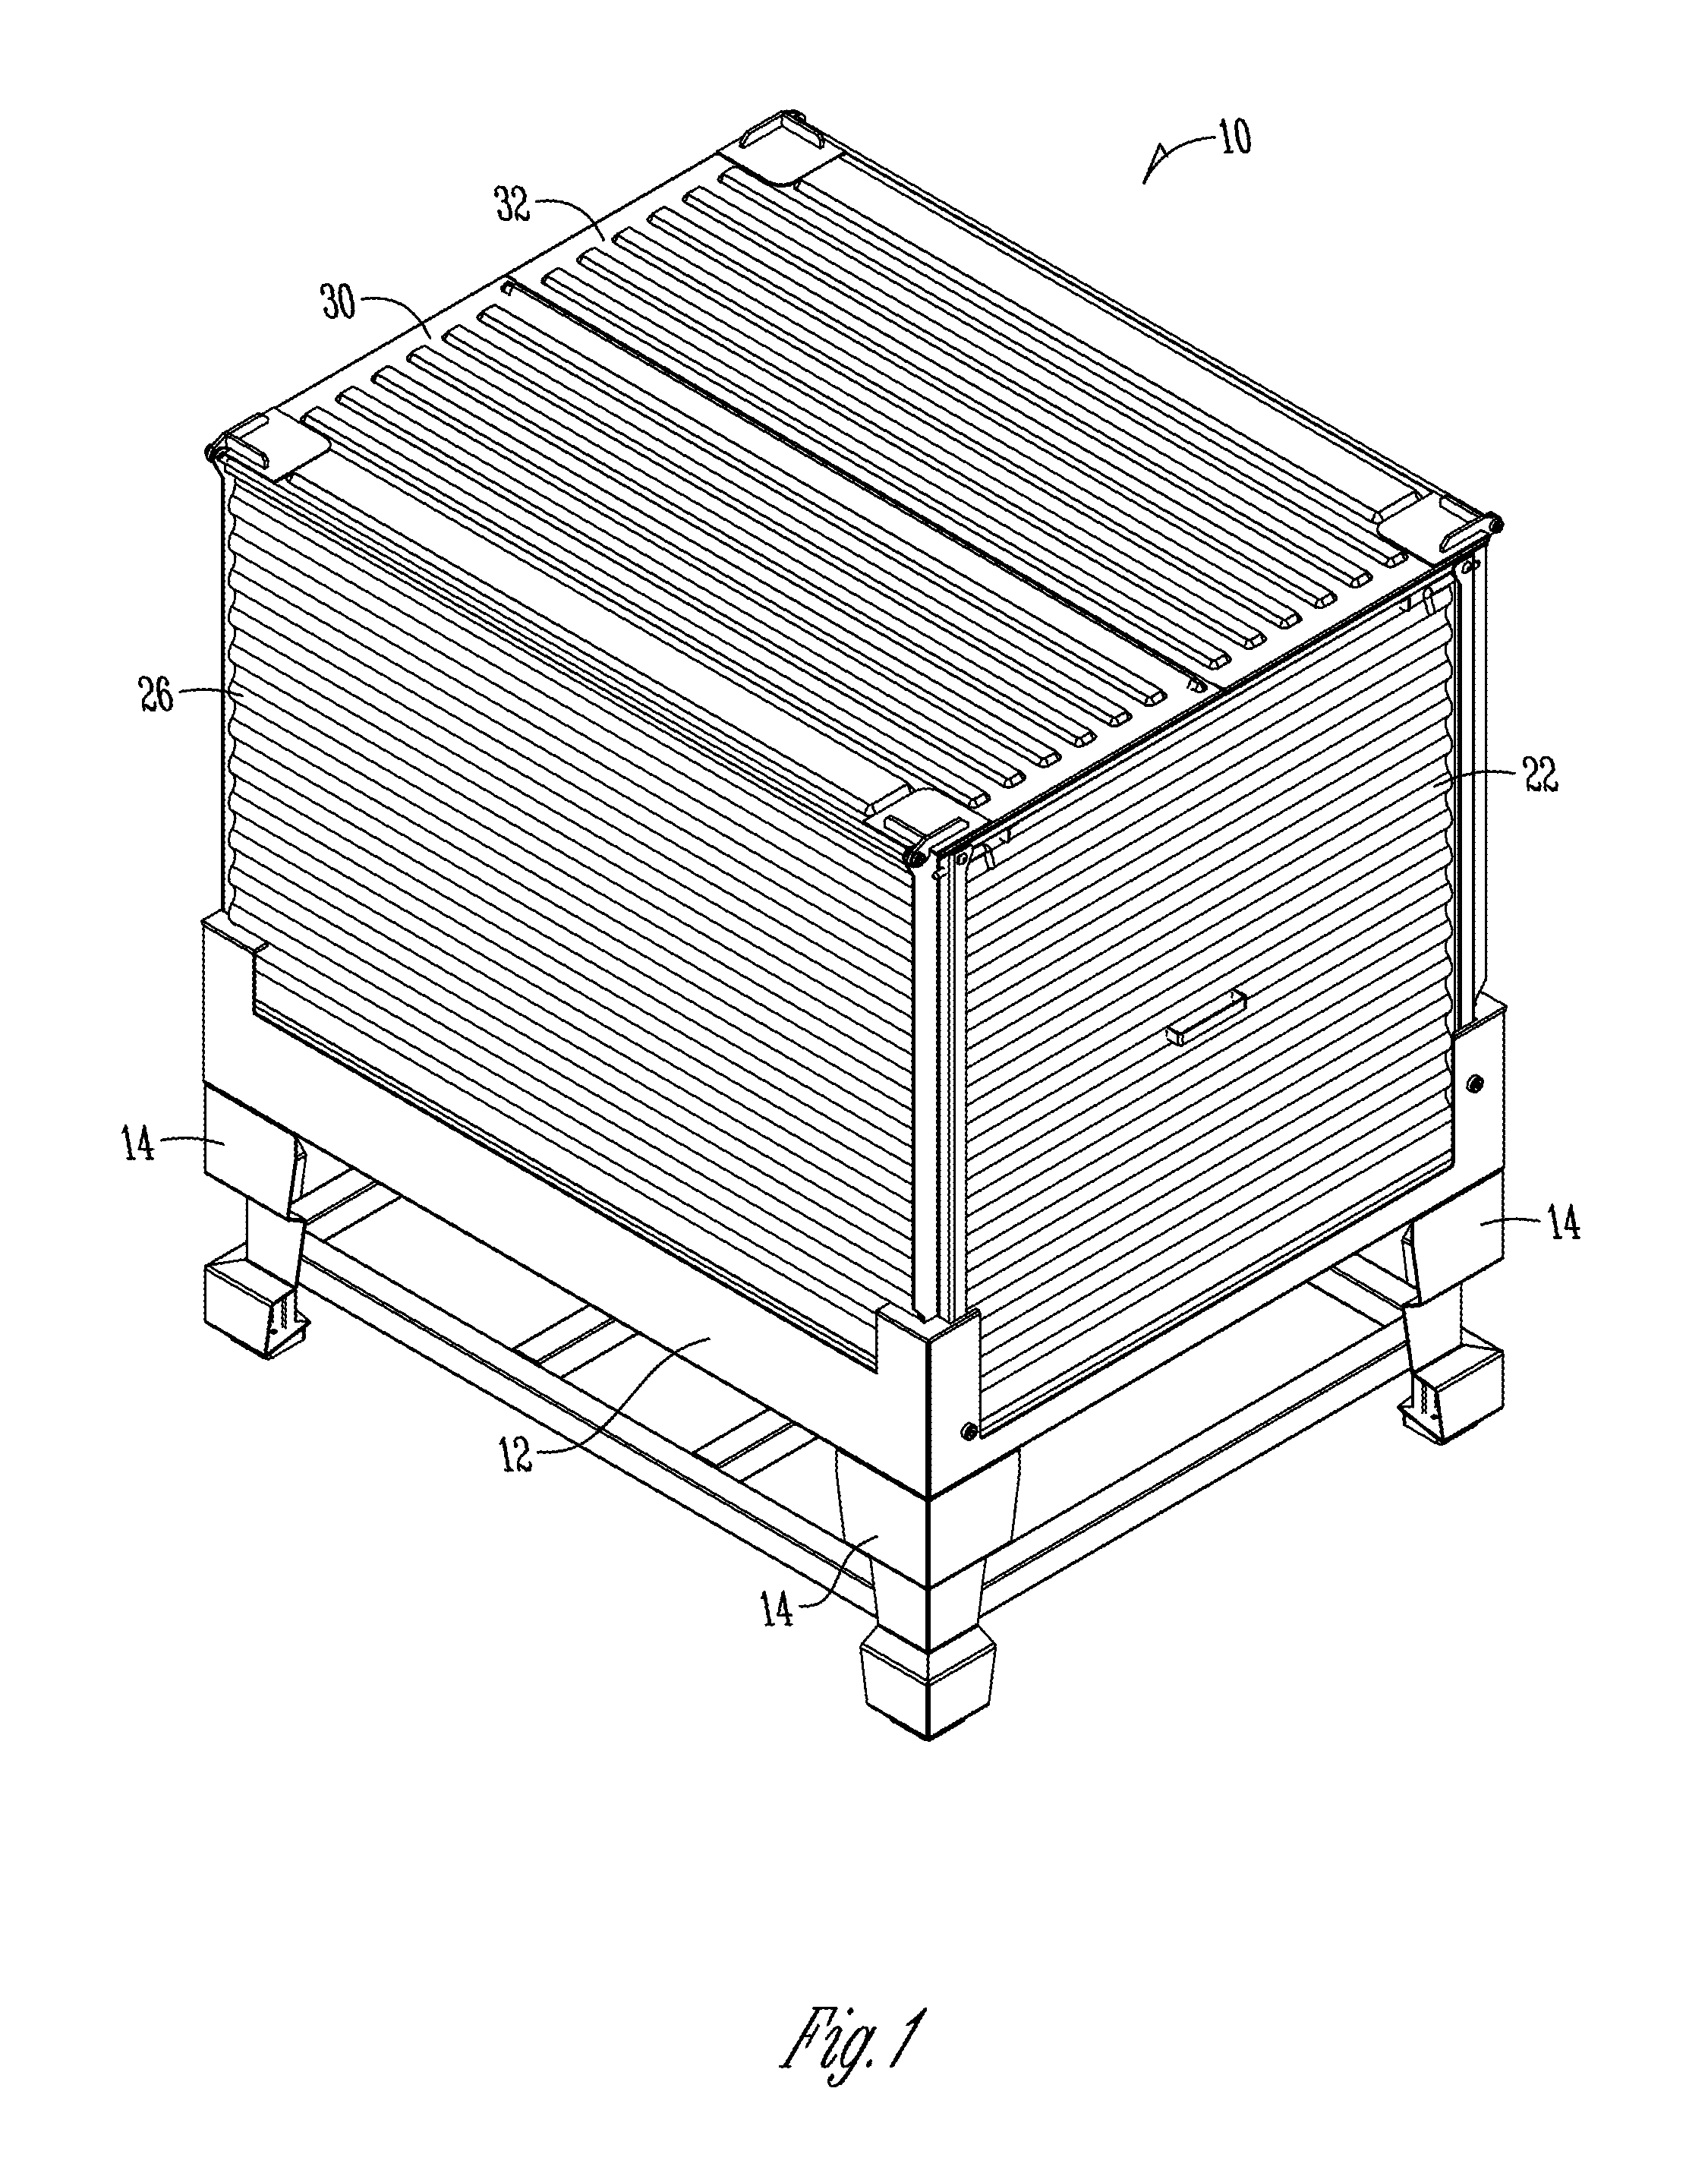 Folding seed box with fork lift base